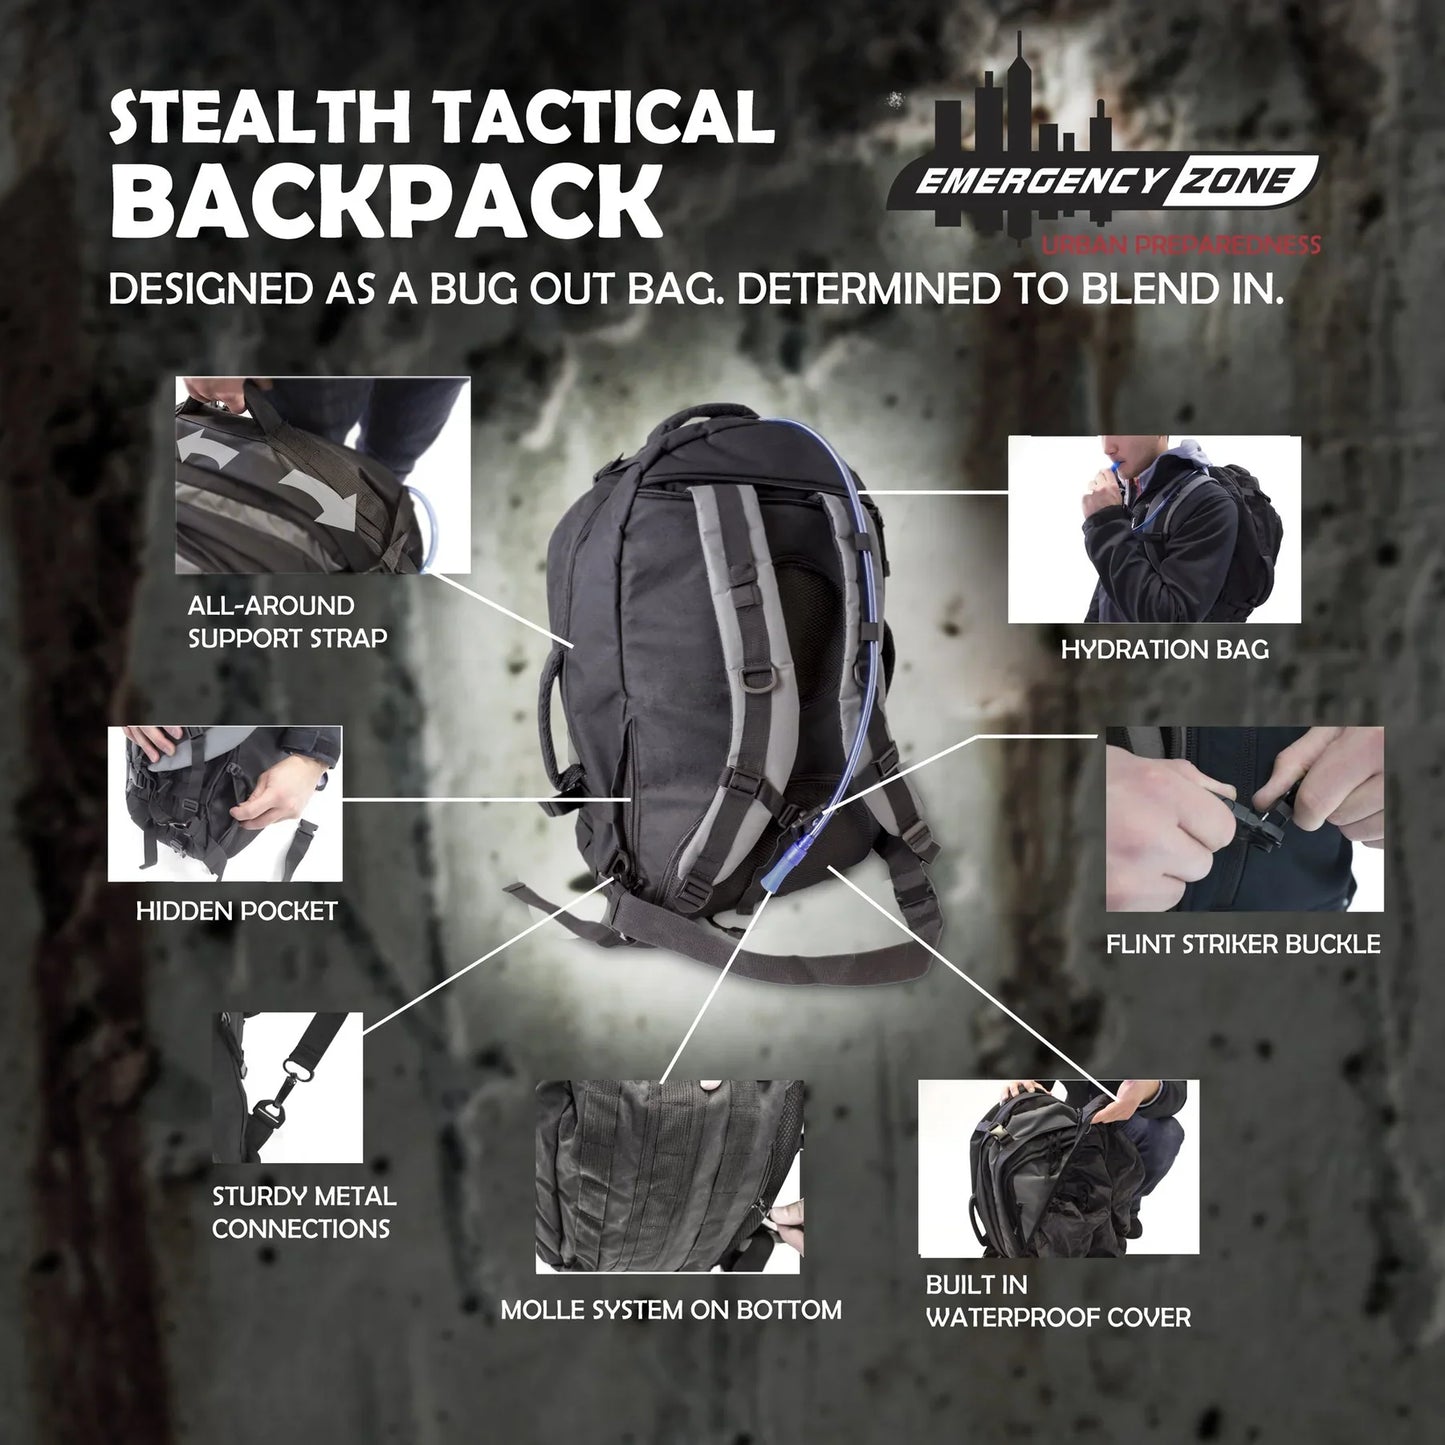 Emergency Zone Stealth Tactical Backpack with Hydration Bladder